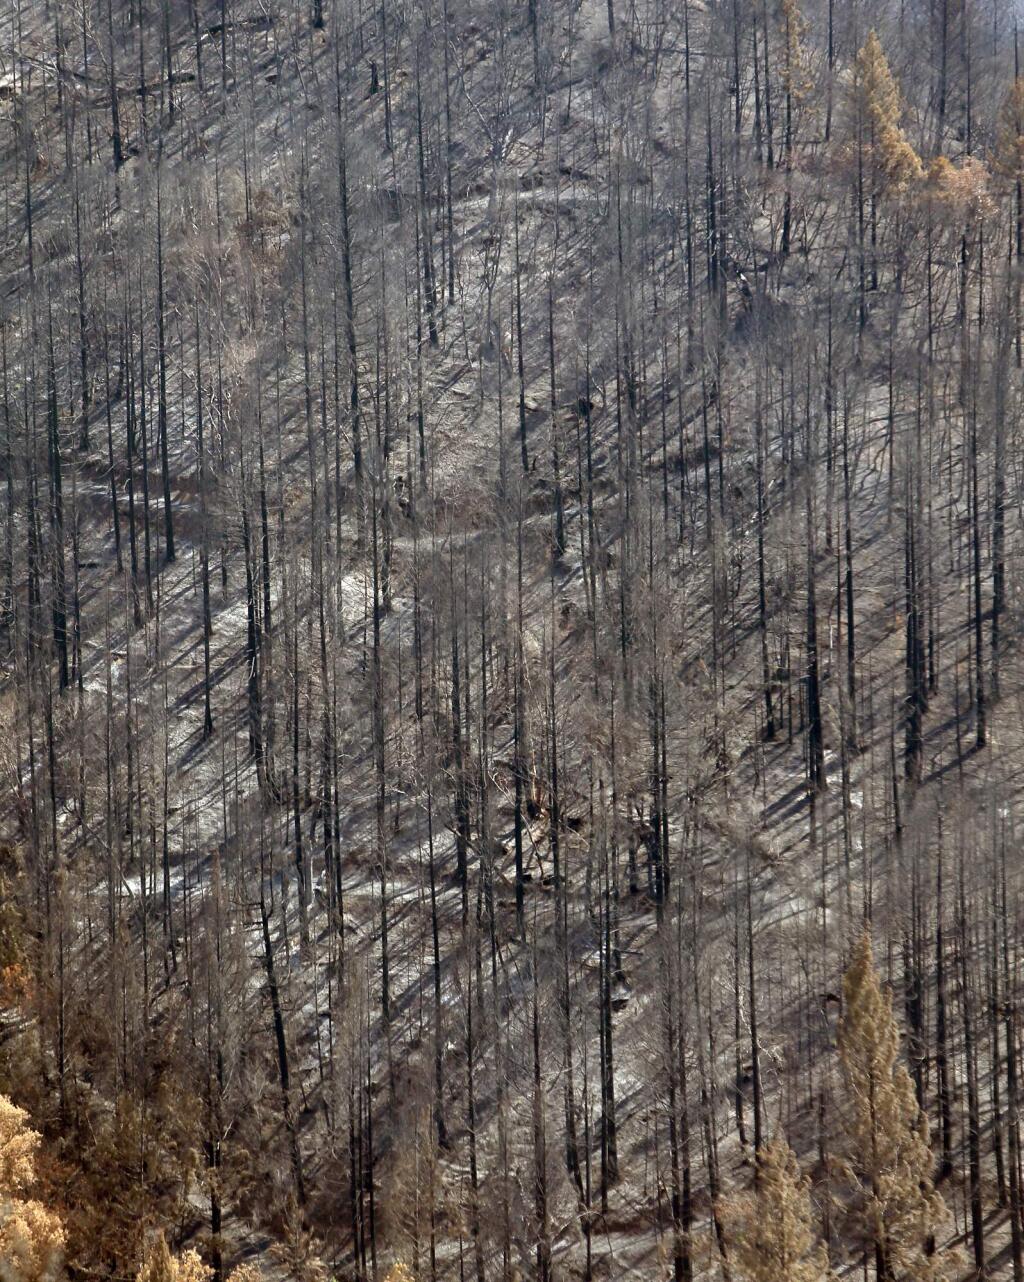 An off-road trail zigs up a hillside, Friday, Sept. 14, 2018. The trees were burned in the Mendocino Complex Ranch fire as it roared through the Mendocino National Forest. (Kent Porter / The Press Democrat) 2018